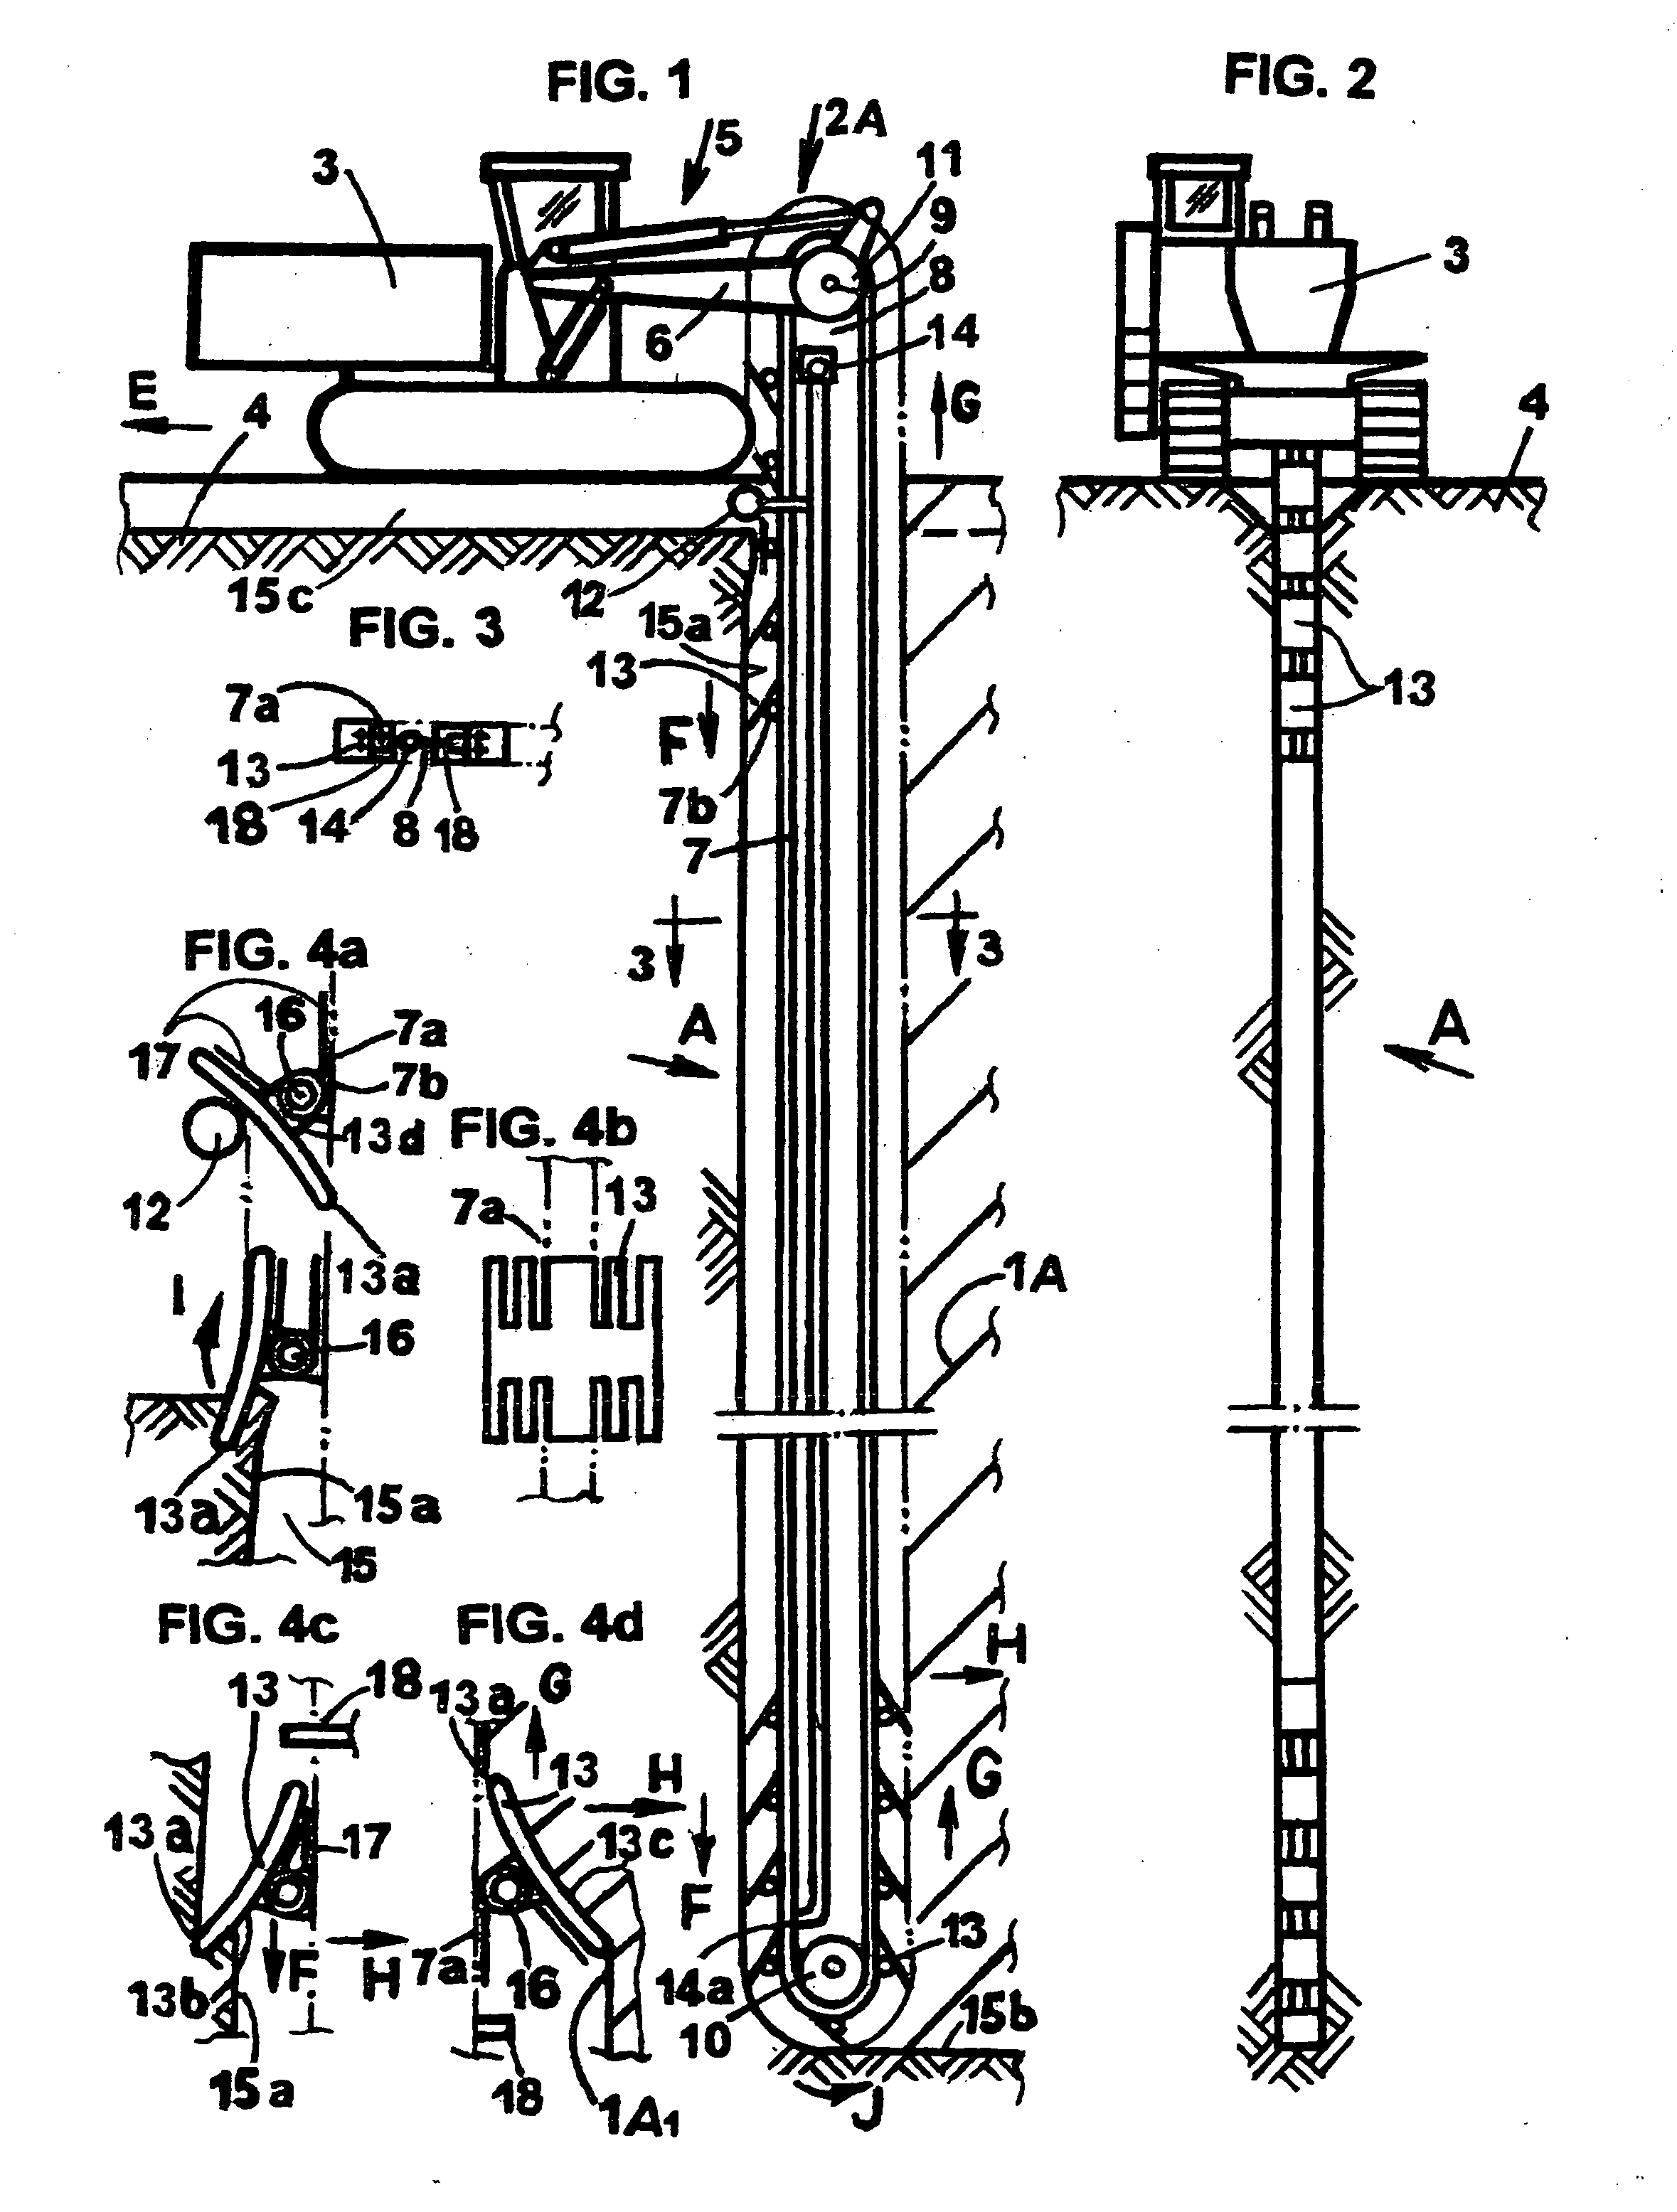 Excavator and a method for constructing an underground continuous wall